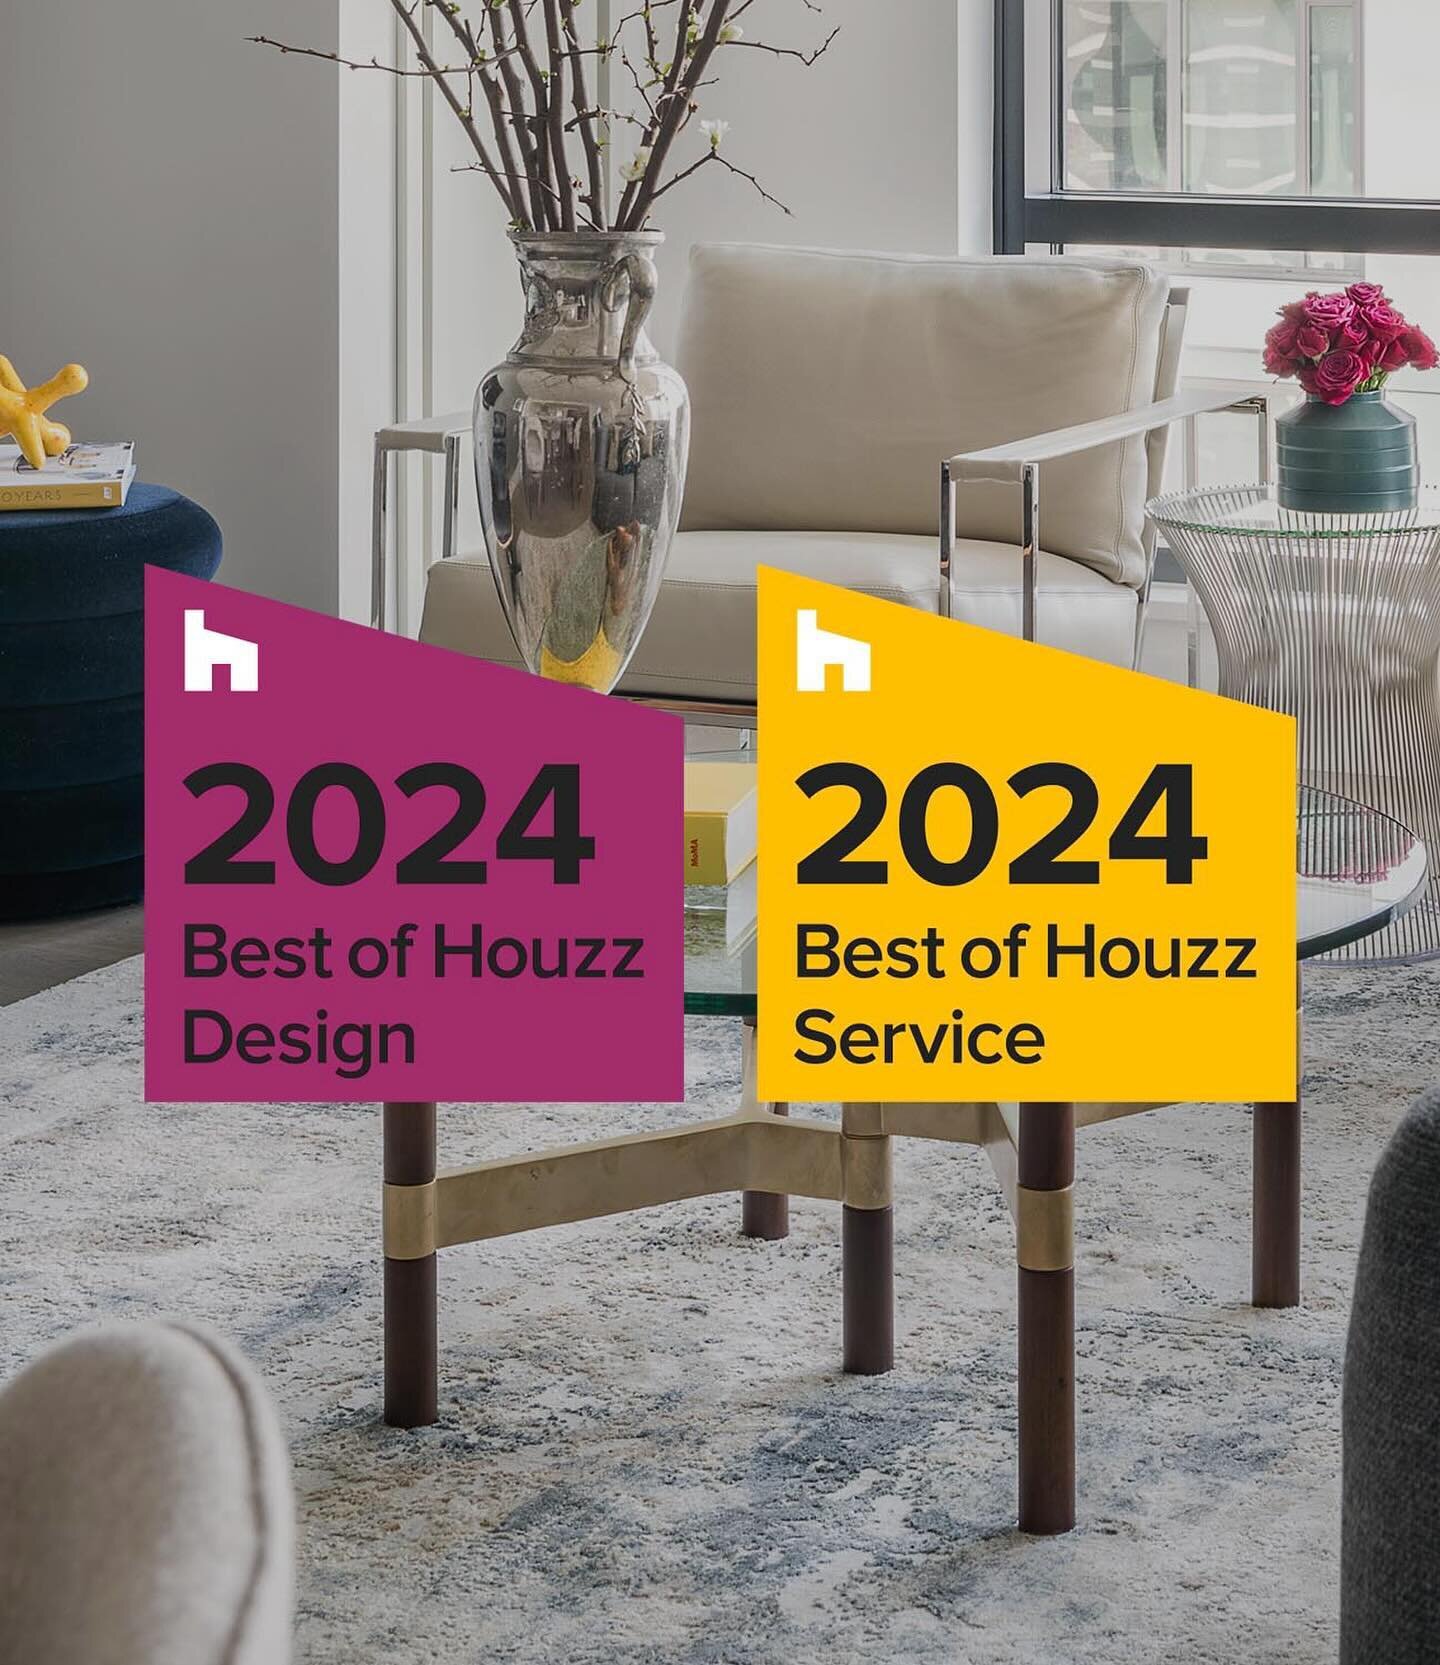 OOPS we did it again. Thanks @houzz for awarding us the Best of Houzz Design and Service for the 3rd year in a row! We&rsquo;re so proud of our hard work, our detailed service and our trusting clients. 🫶🏼

#houzz 
#interior 
#designgoals 
#designer